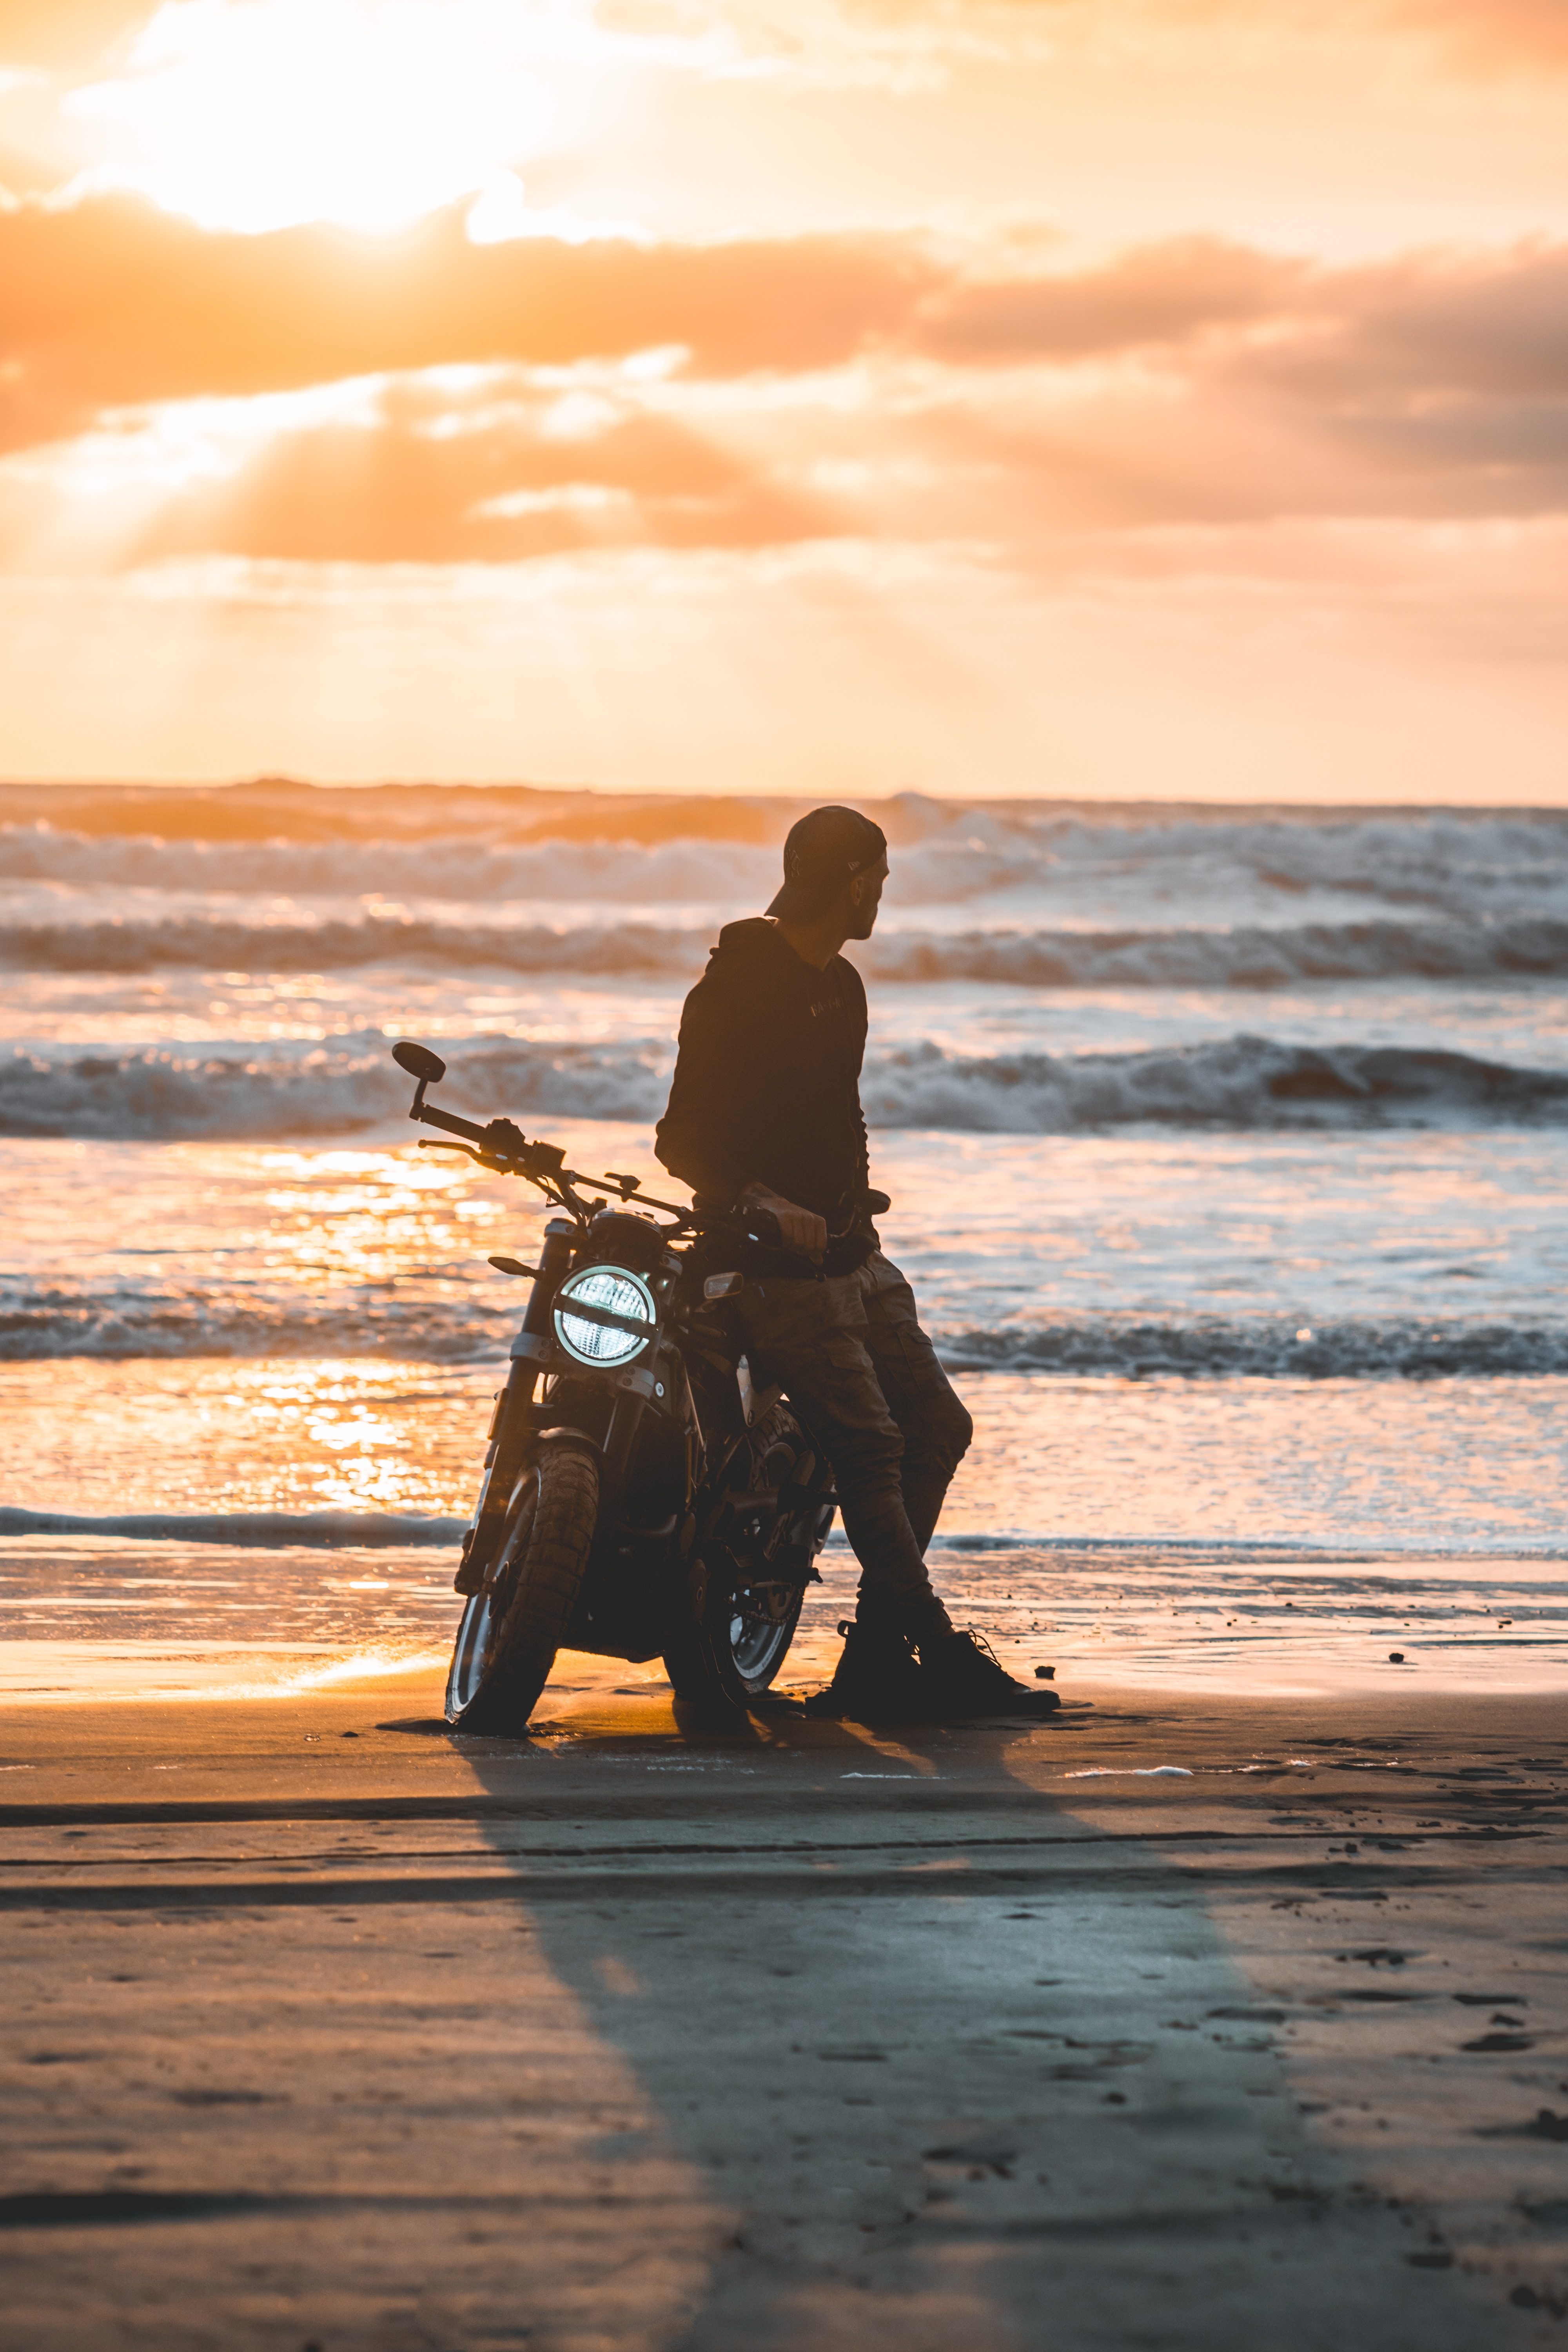 motorcycle, motorcyclist, motorcycles, sunset, silhouette, loneliness